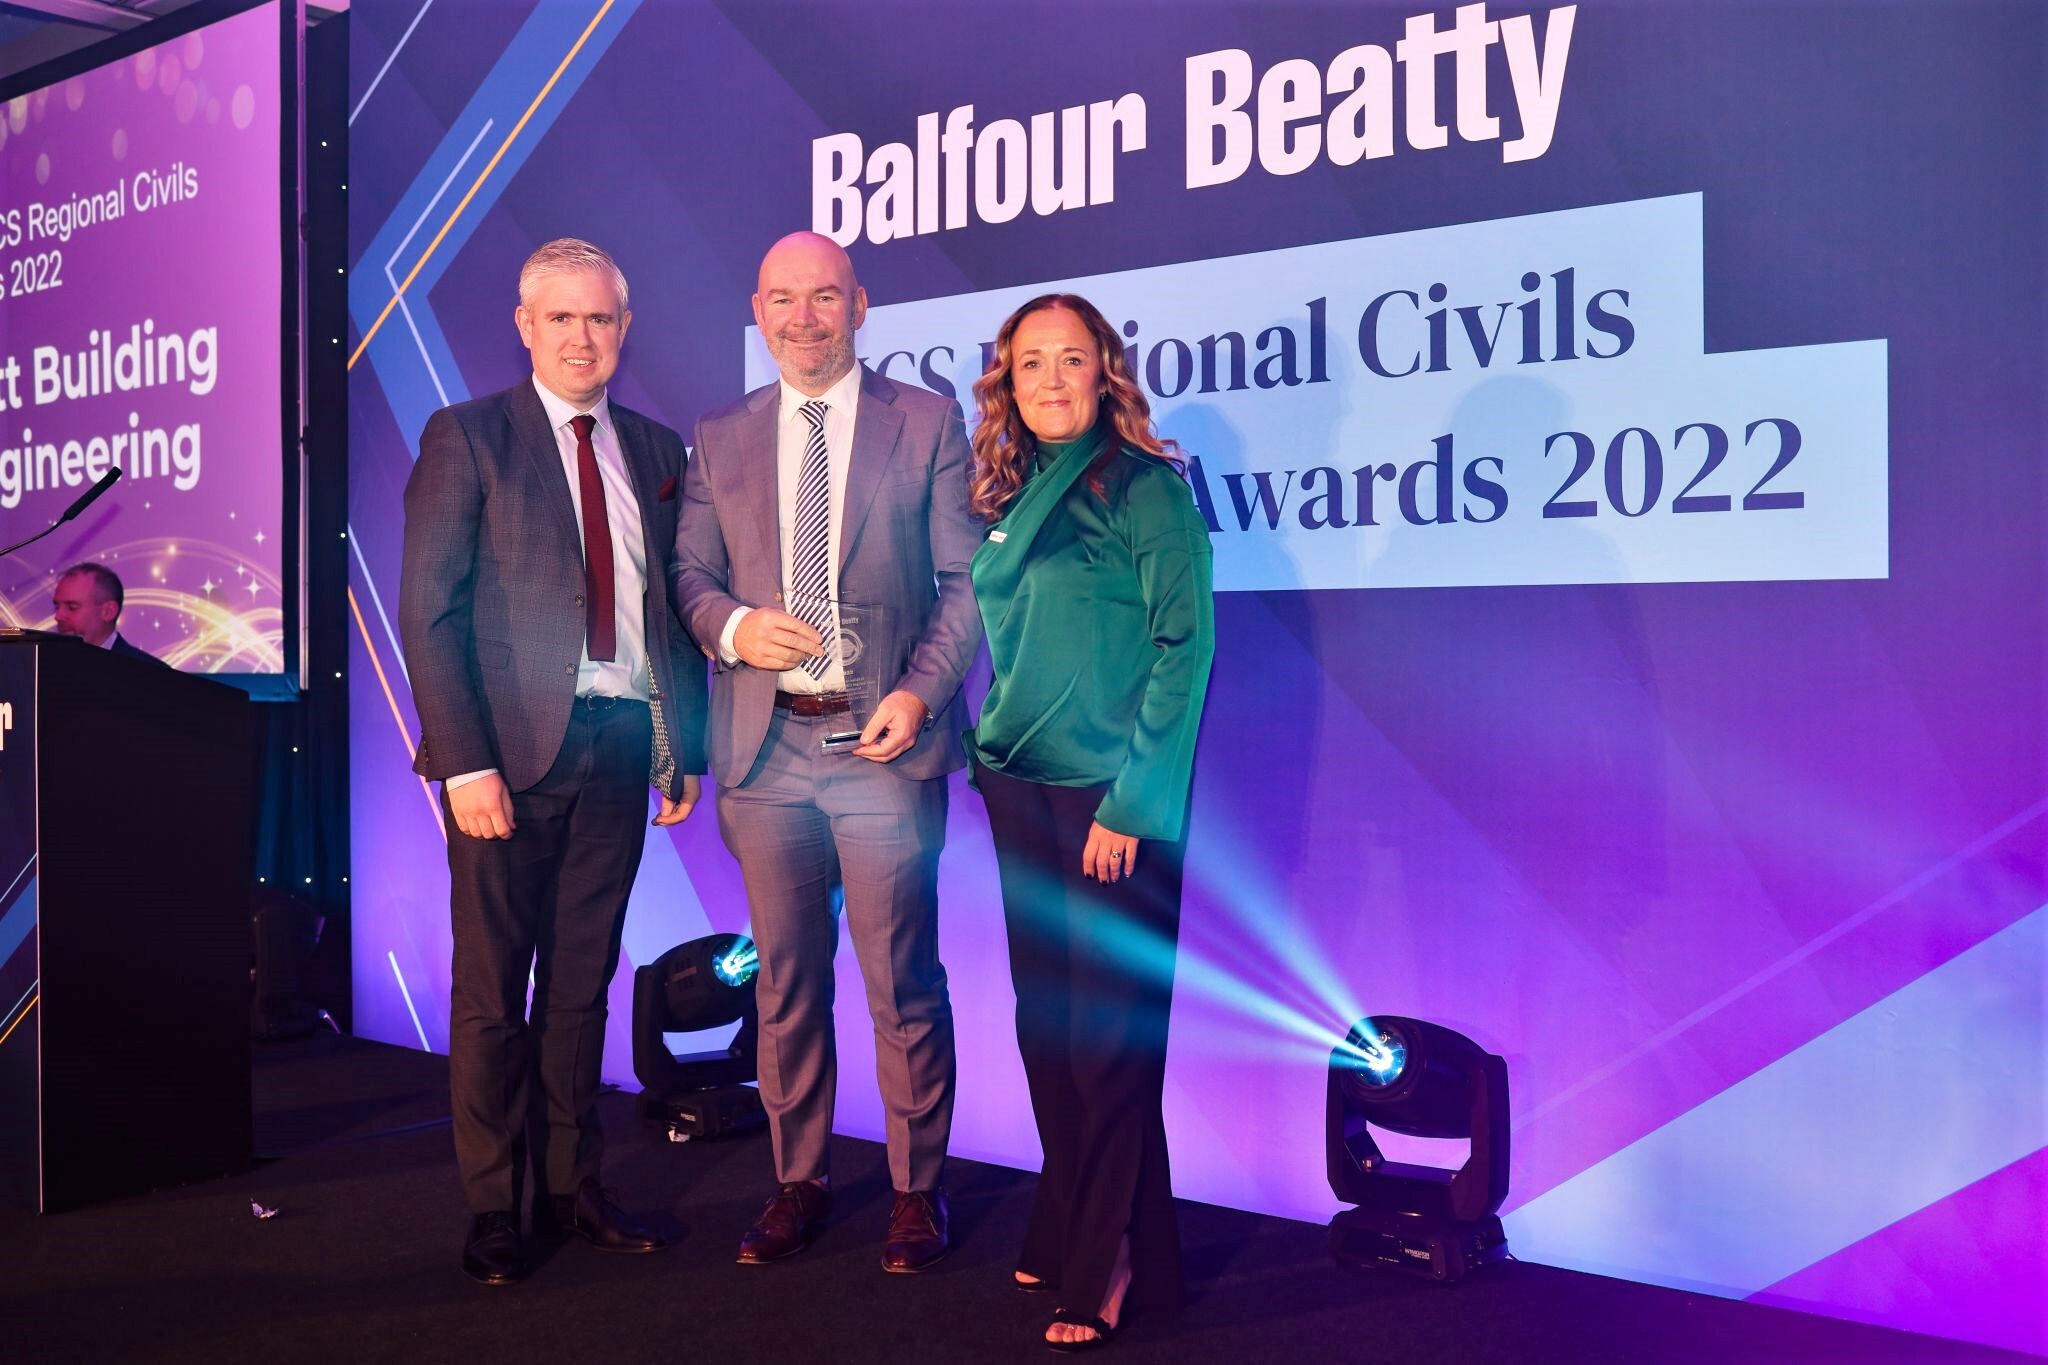 The Balfour Beatty UKCS Regional Civil Supply Chain Awards saw McDermotts presented with the social value award